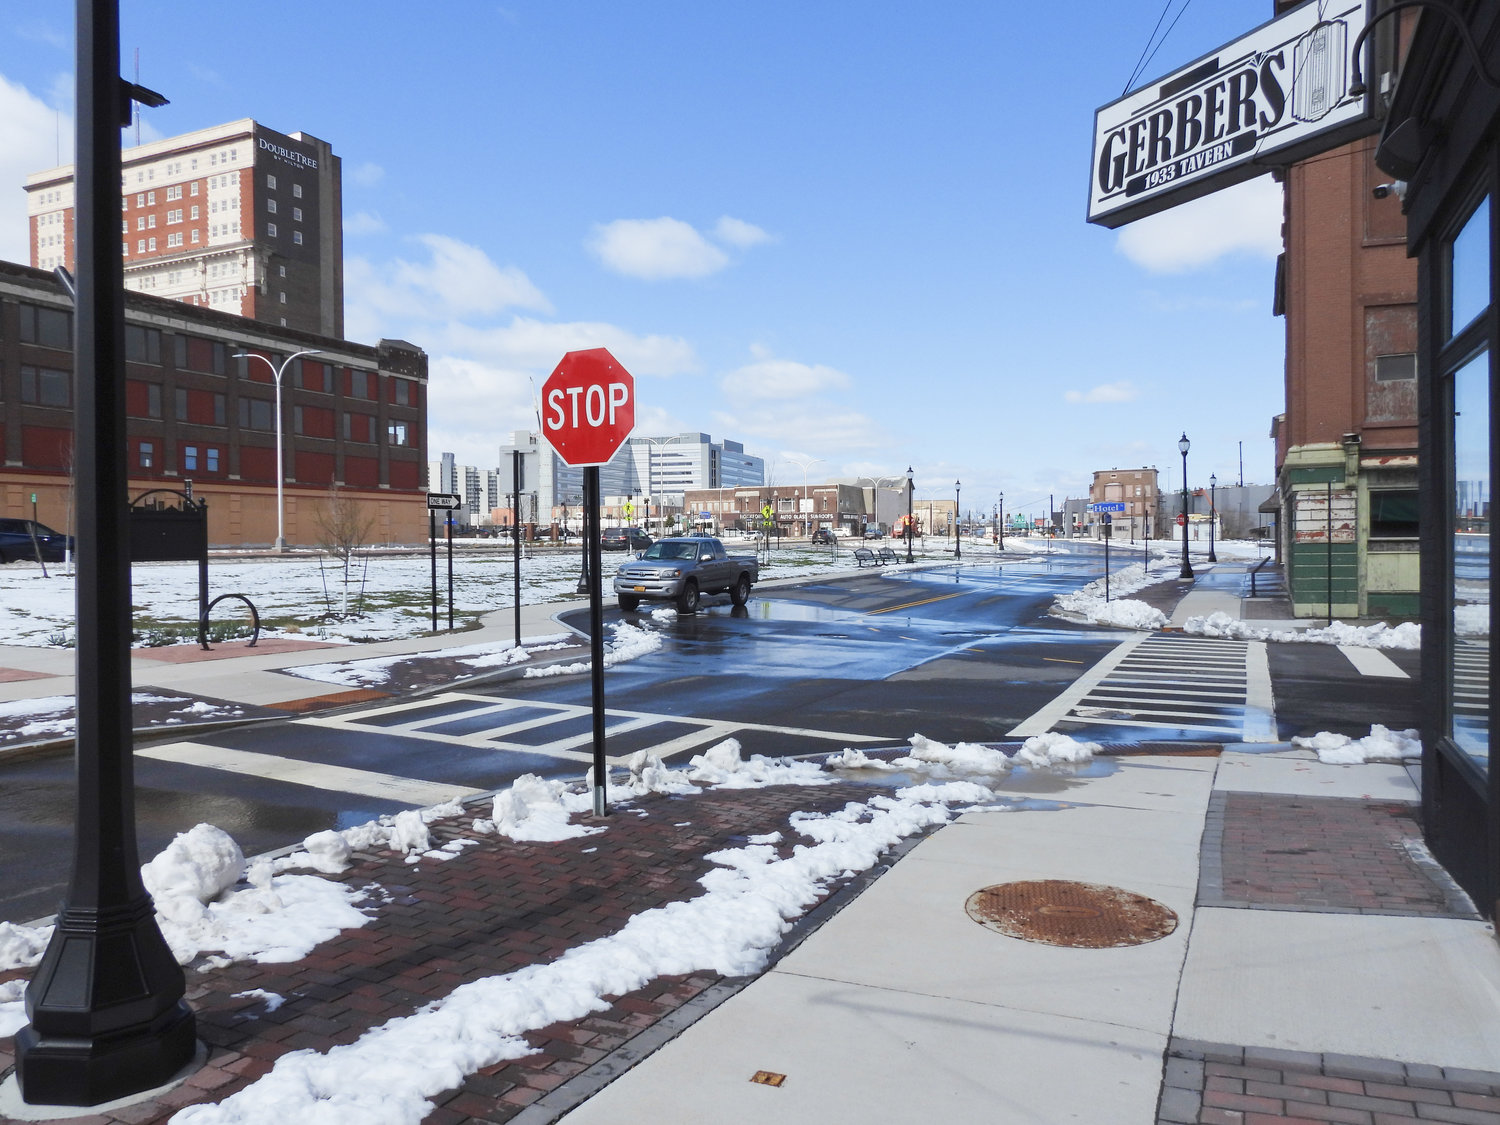 WALKABLE UTICA — Mark Mojave, owner of Gerber's 1933 Tavern, speaks highly of the walkable sidewalks and paths through Bagg's Square that came with the highway project, seeing them as a giant step forward for people to safely enjoy what Utica has to offer.